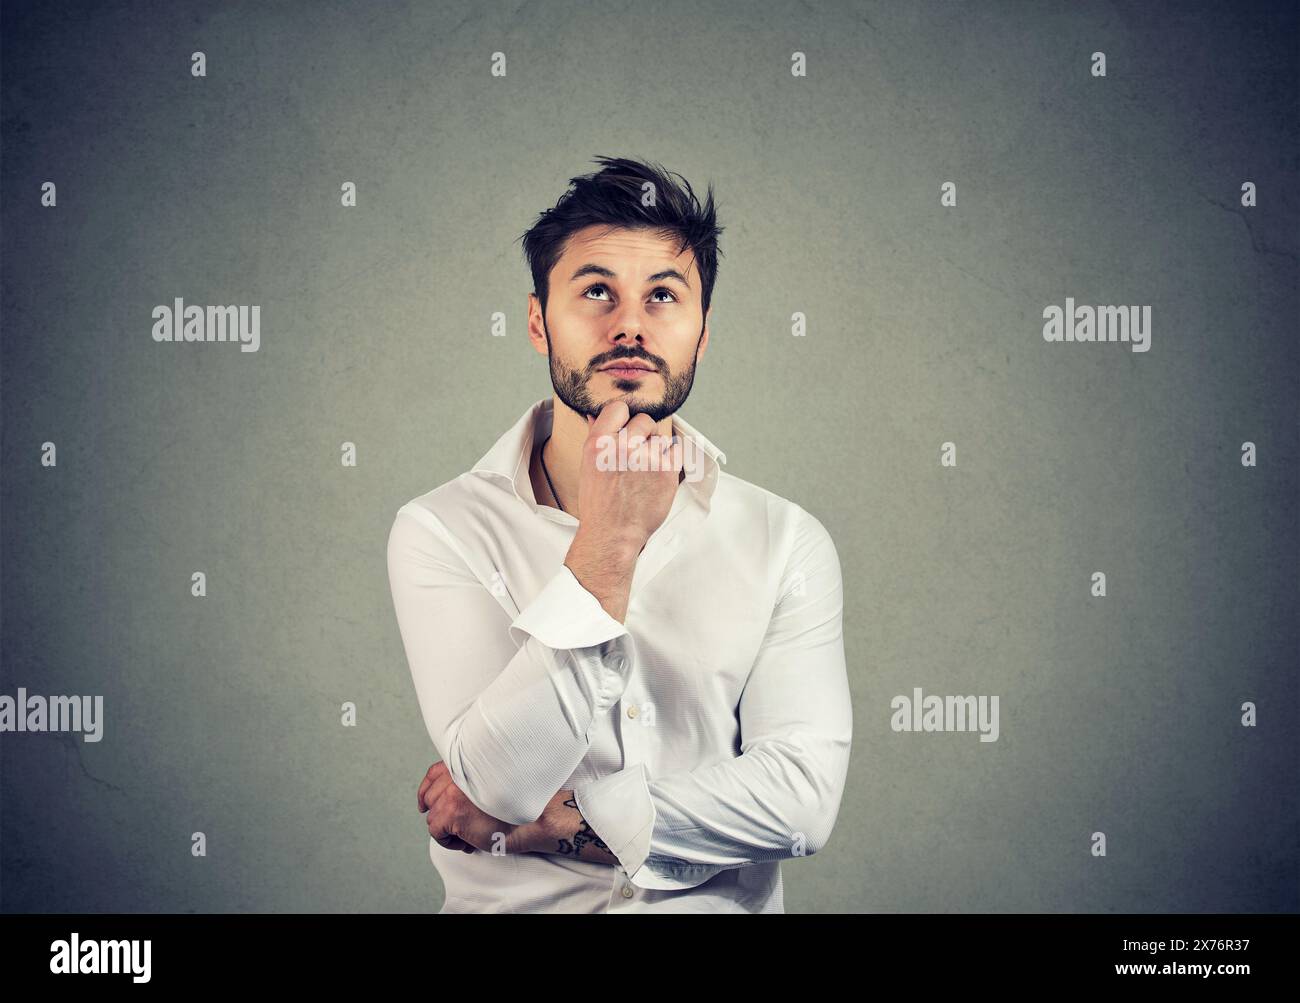 Portrait of a thinking serious man looking up Stock Photo